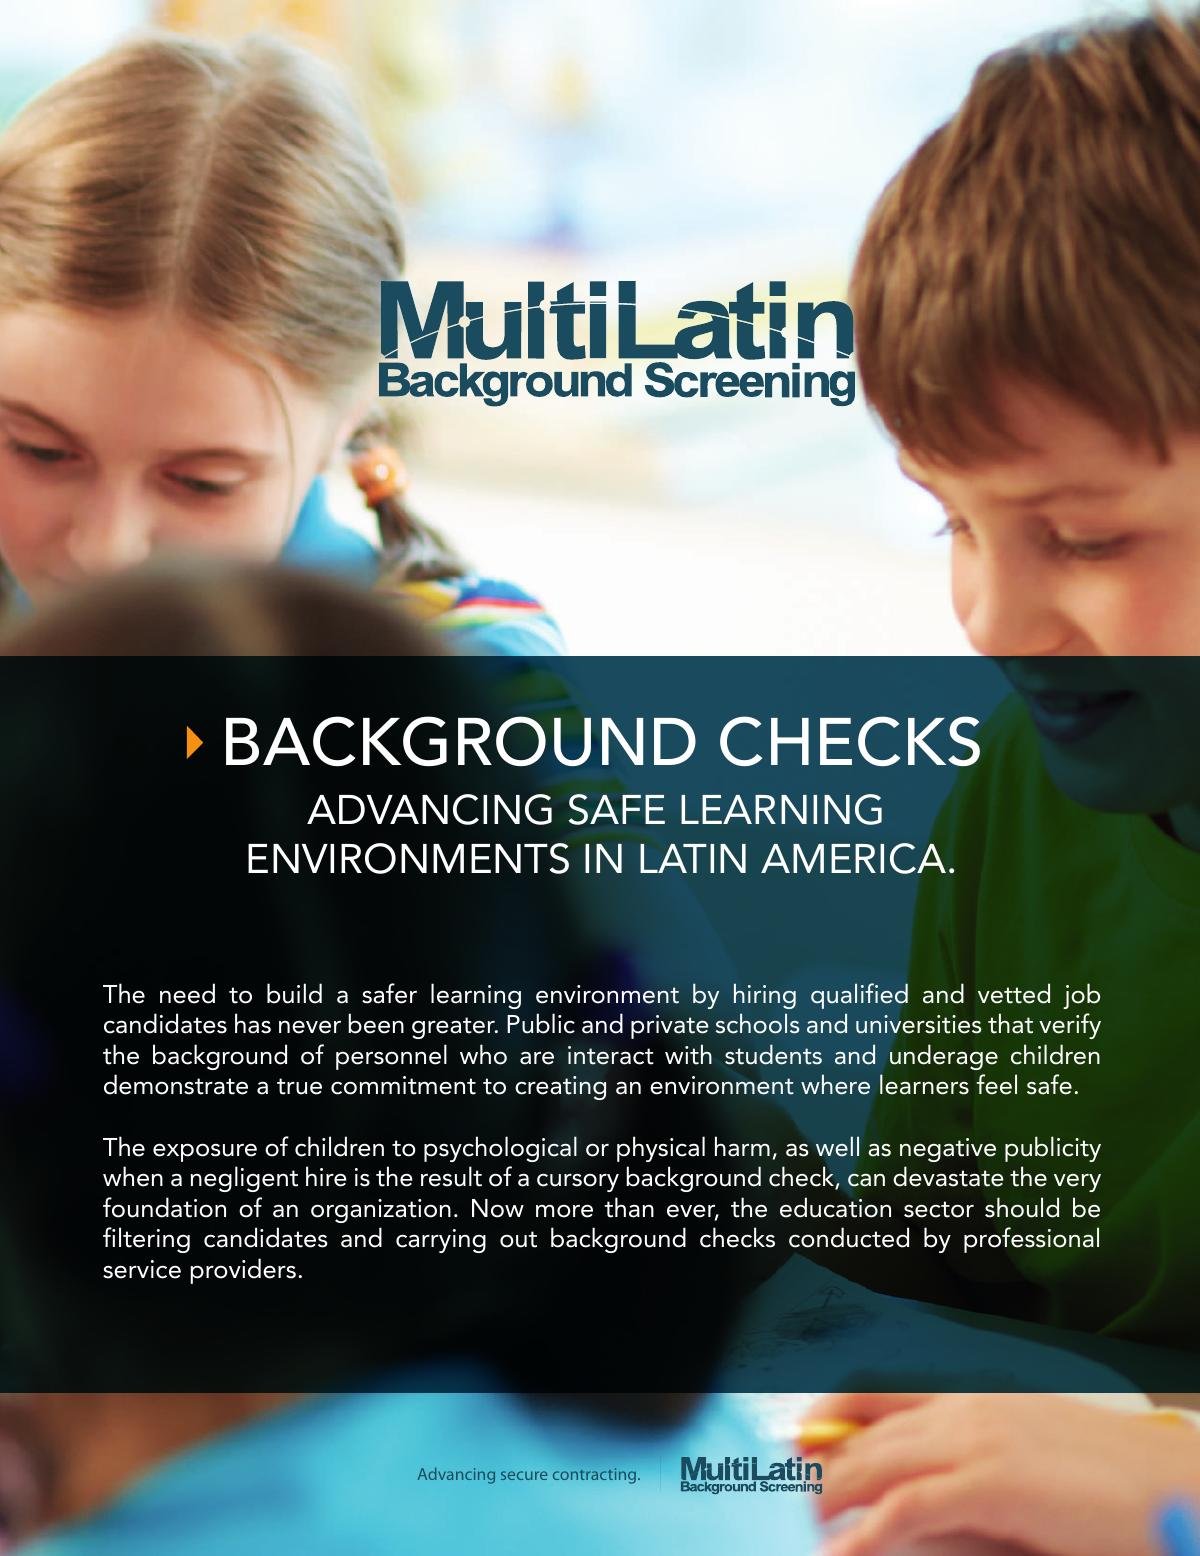 Background Checks. Advancing safe learning environments in Latin America